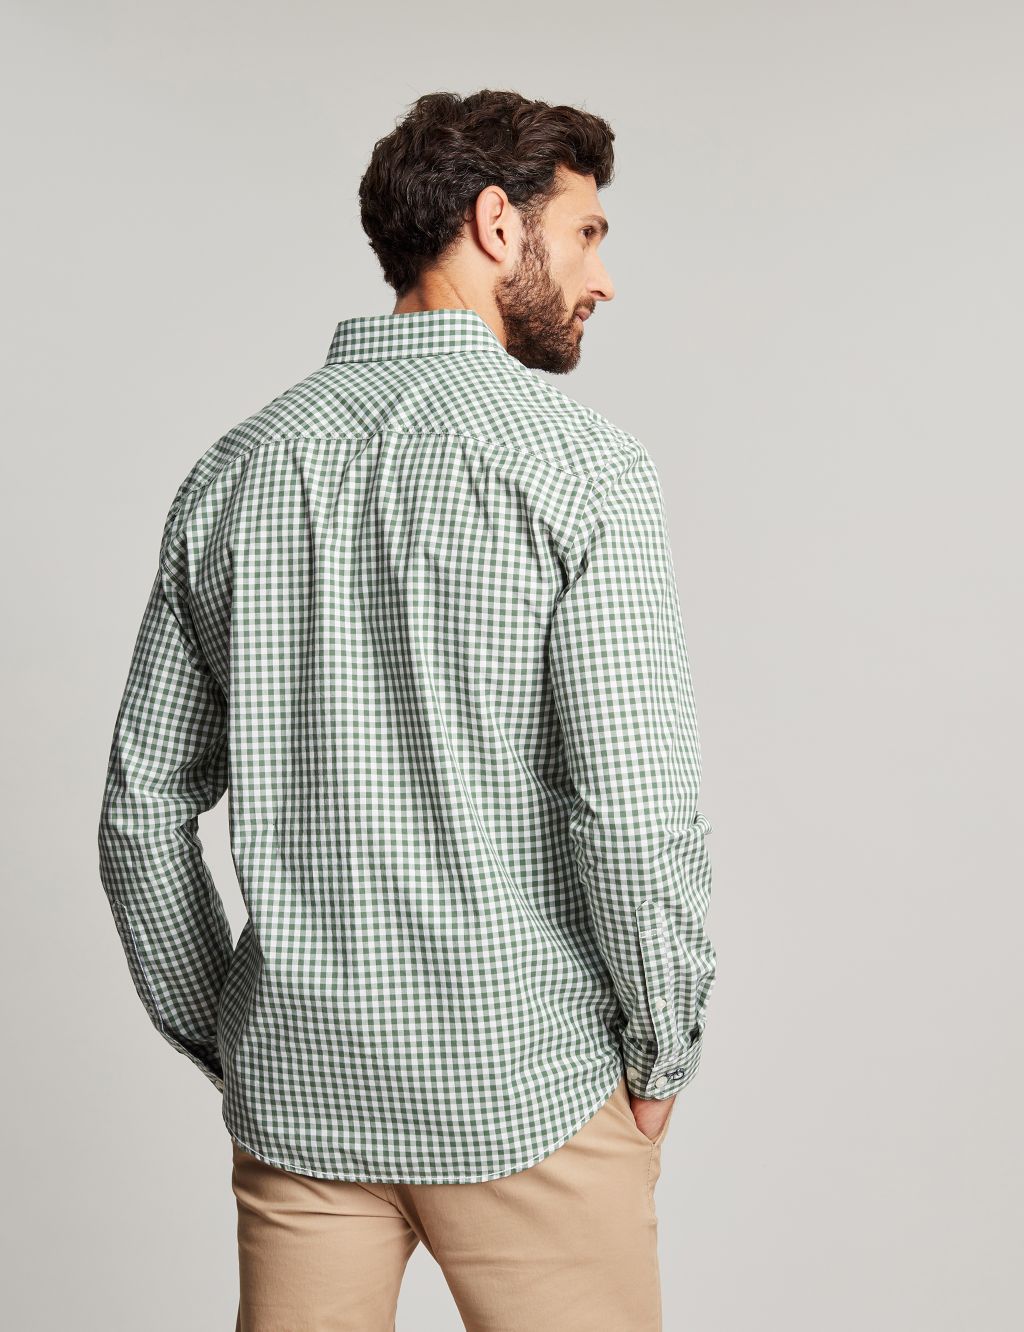 Regular Fit Pure Cotton Check Oxford Shirt image 4